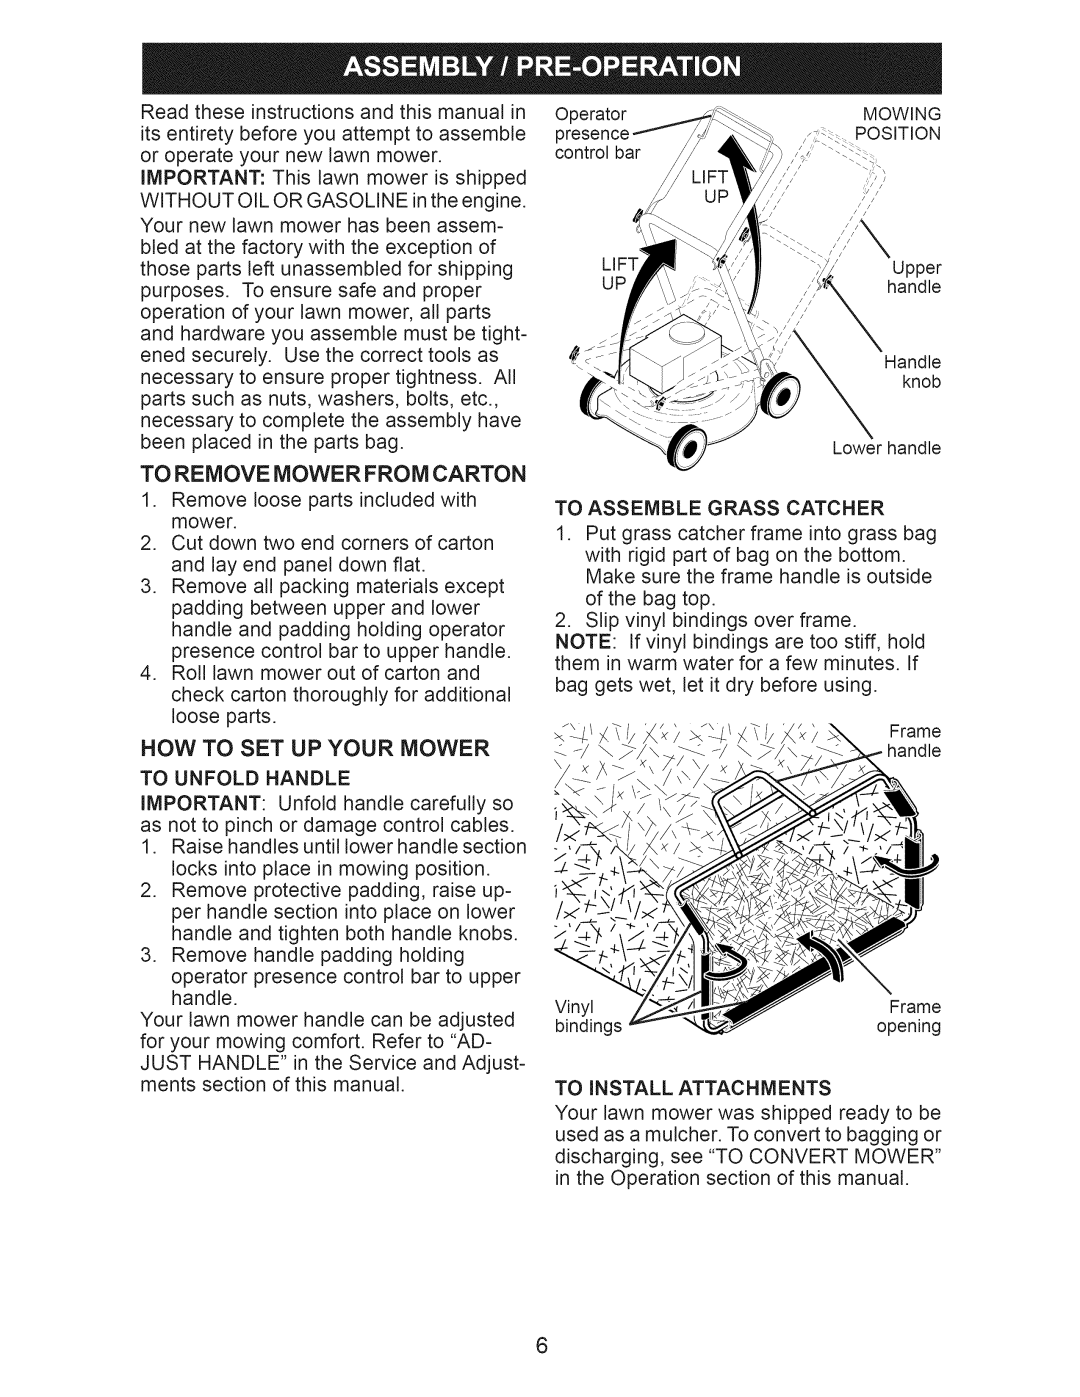 Craftsman 917.389010 manual Now To Set Up Your Mower, To Remove Mower From Carton 